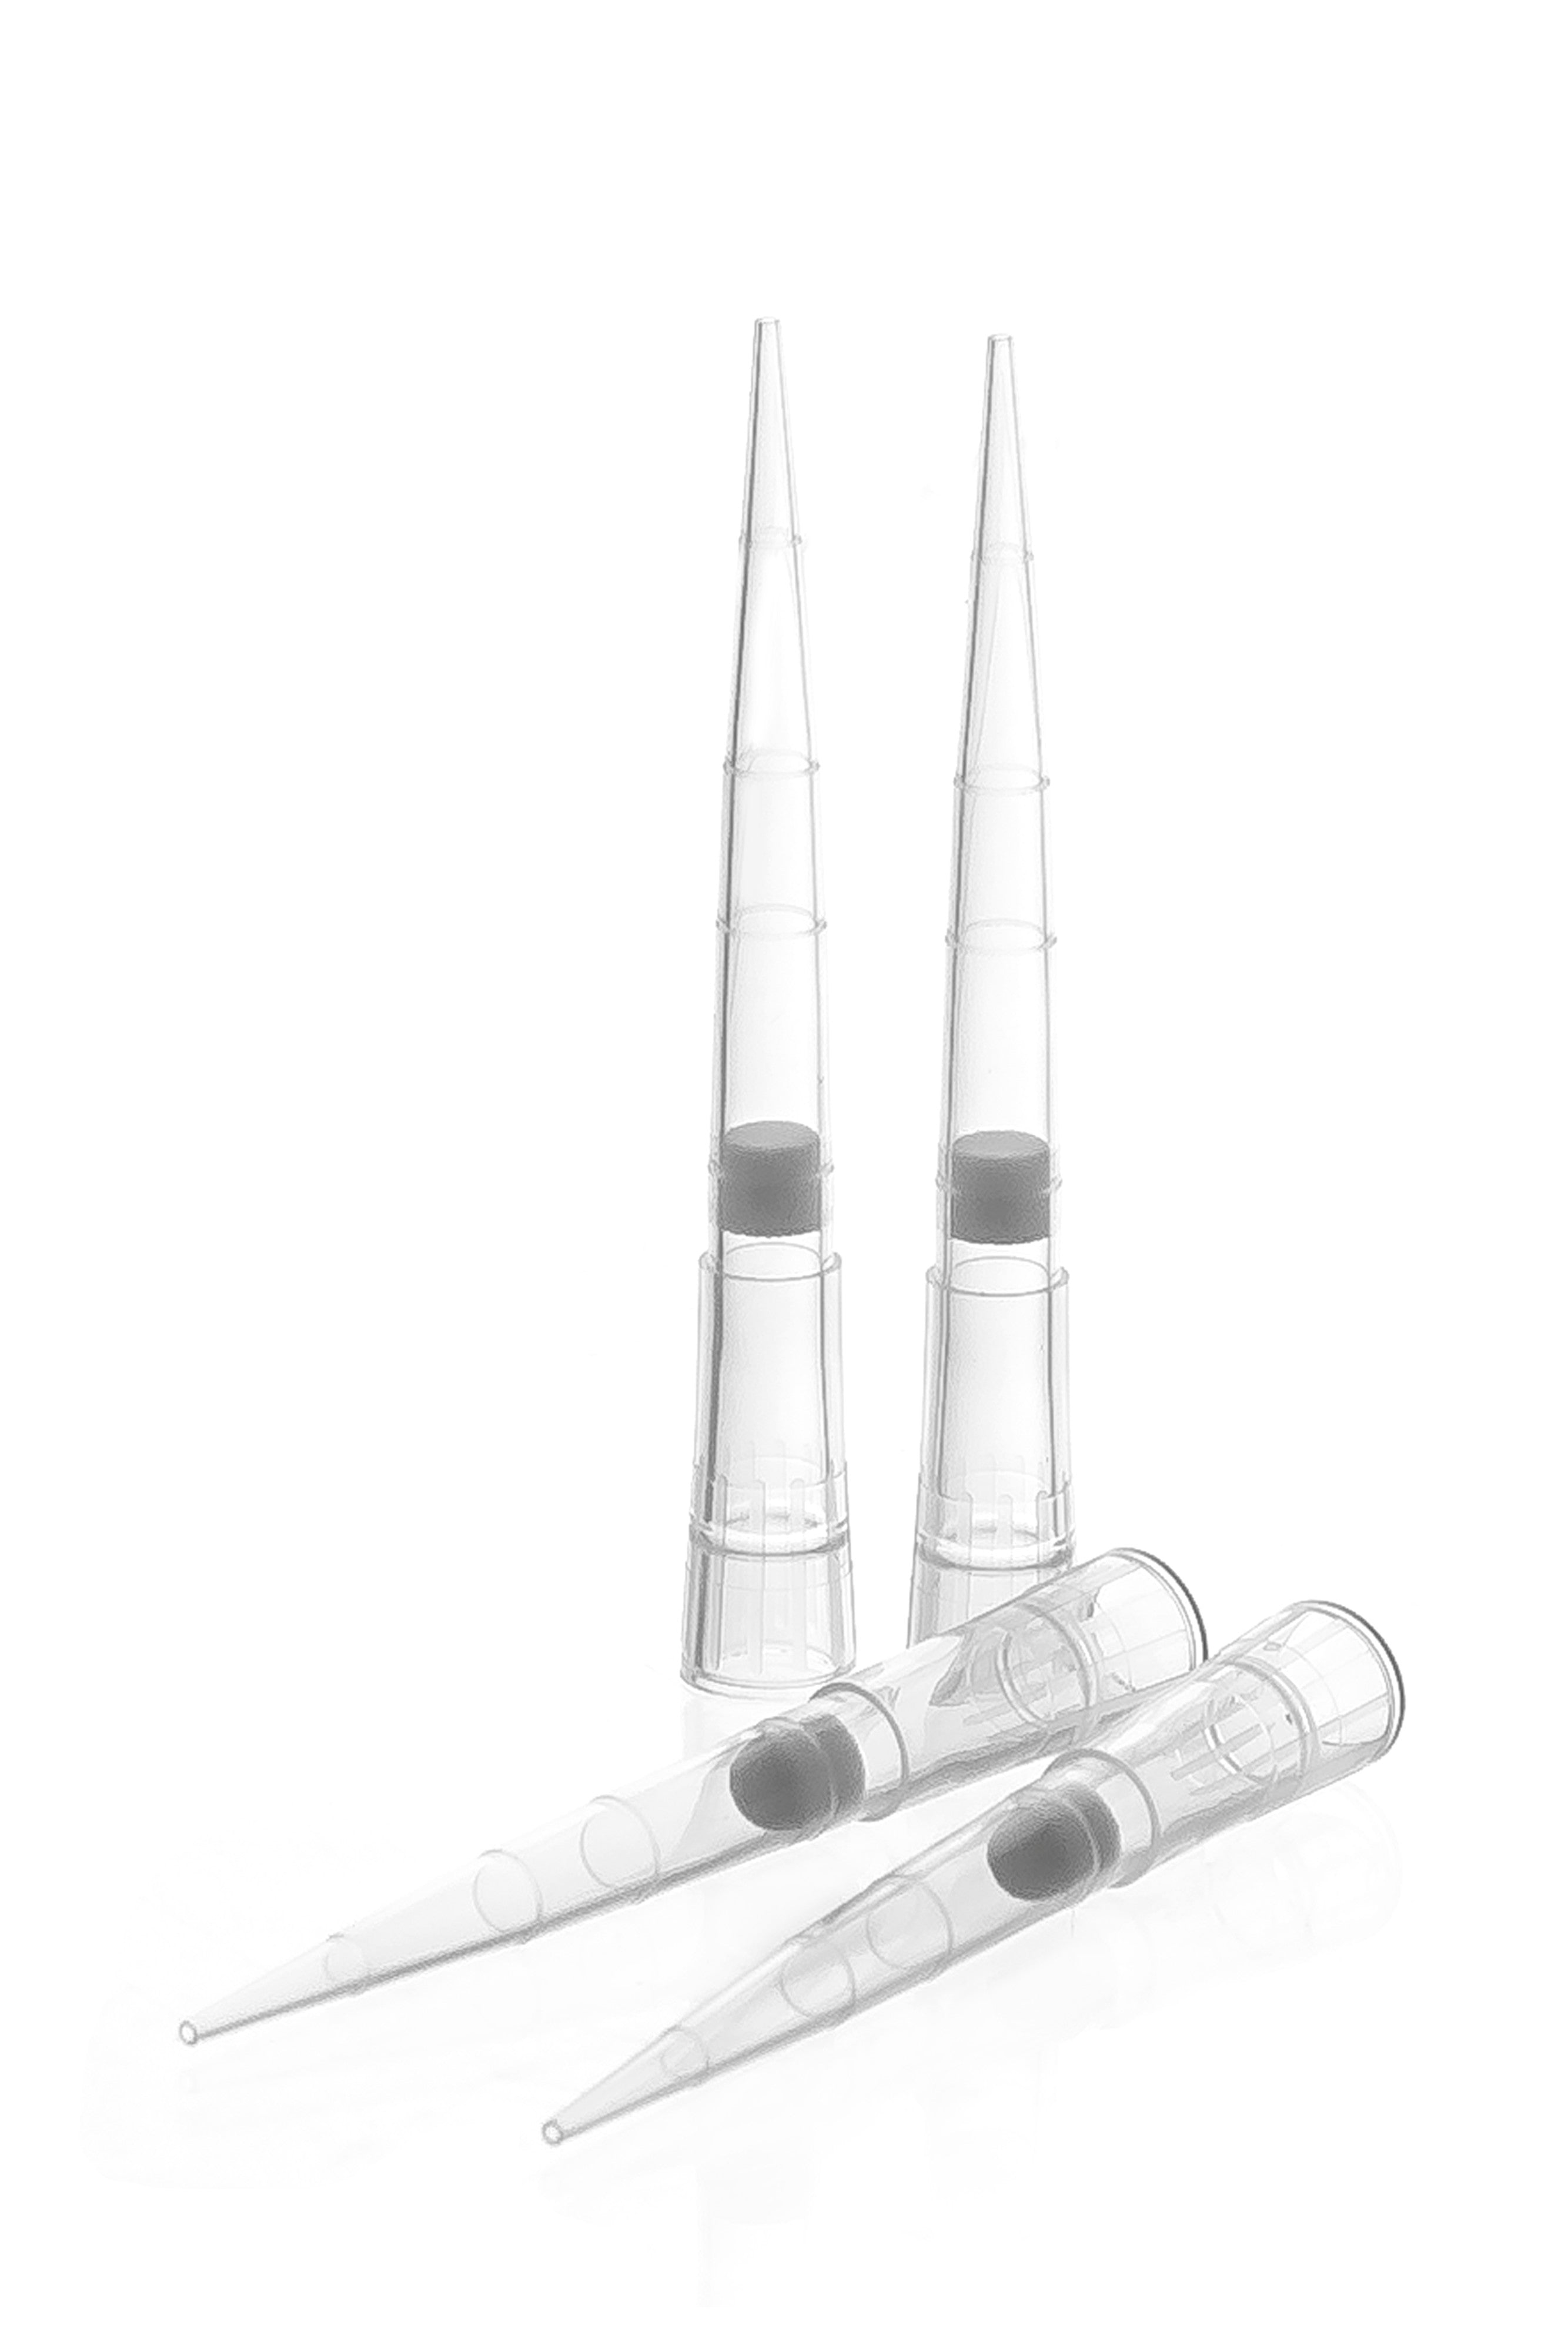 Filtered Micropipette Tips, 100µl capacity, Autoclavable, Pack of 1000